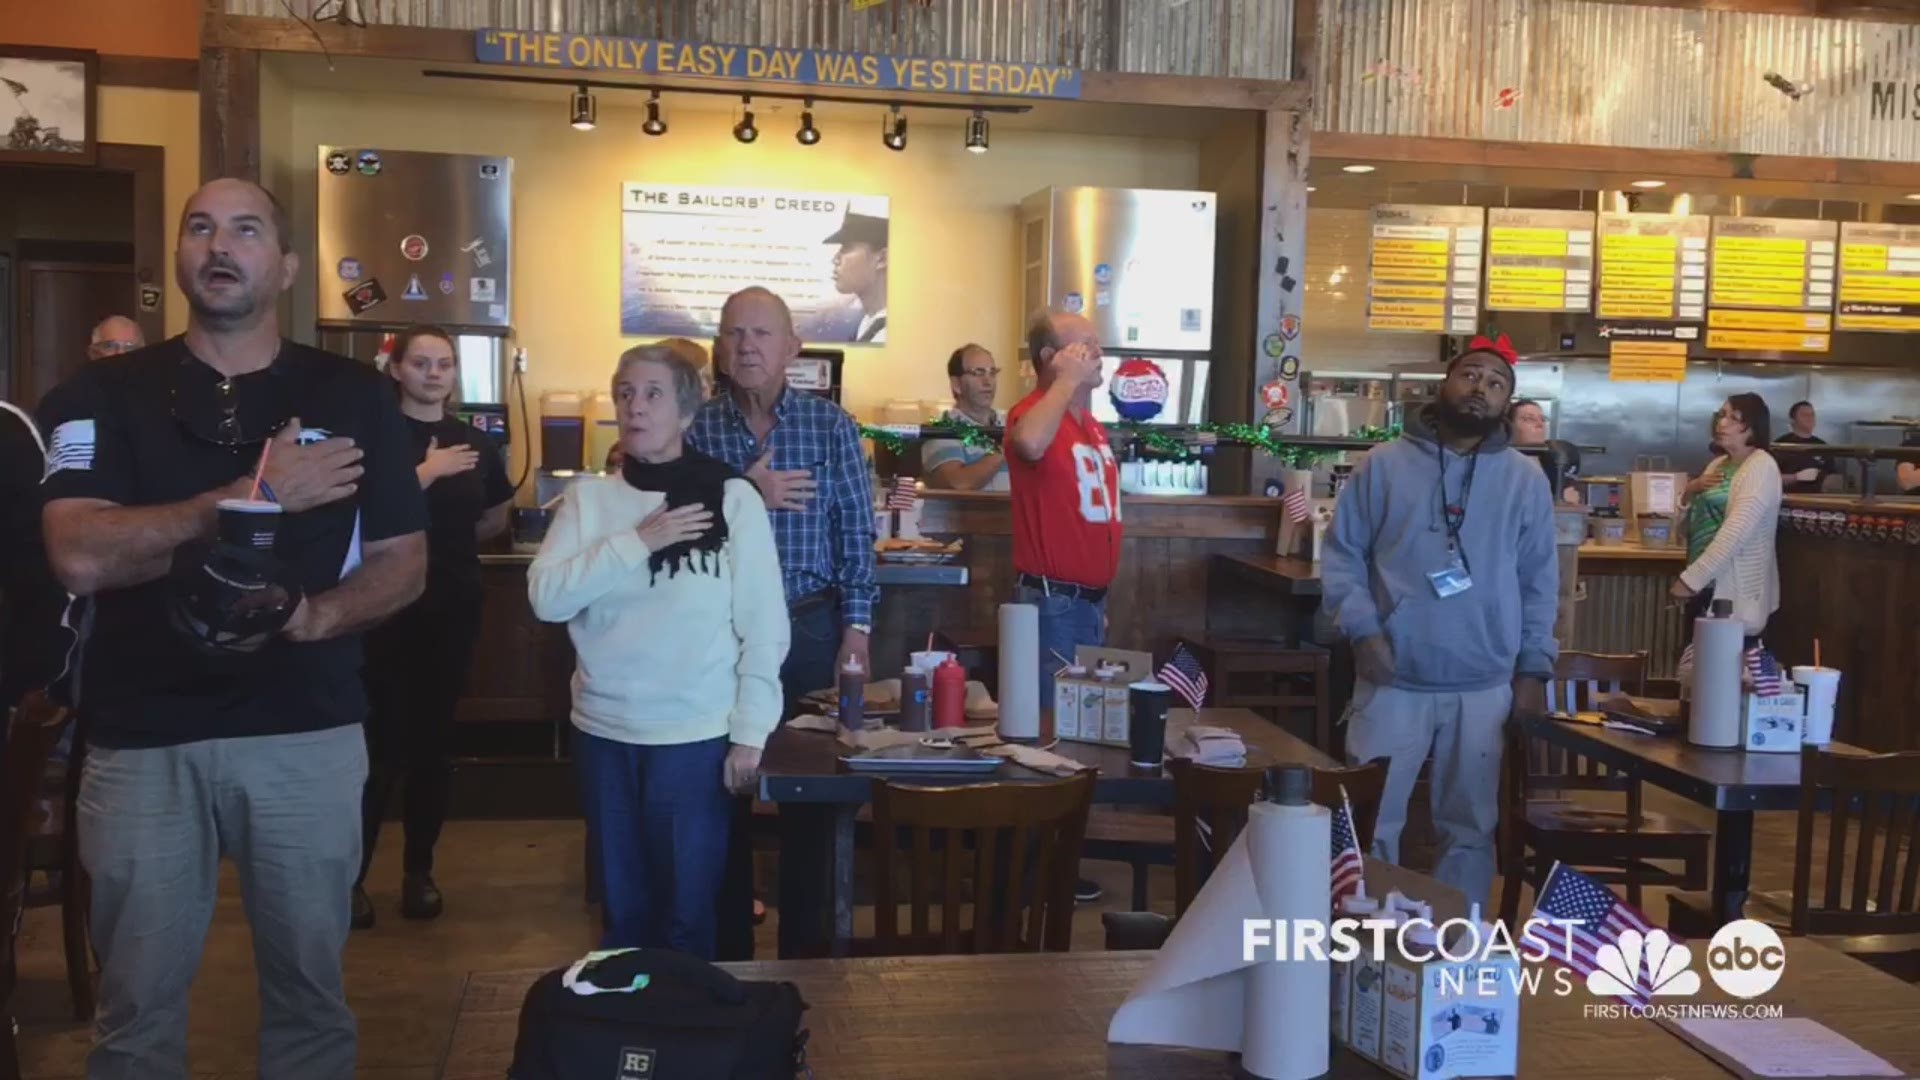 Customers and employees at Mission BBQ take a moment out of their lunch to sing the National Anthem. Though they do this every day, they are honoring those who lost their lives at Pearl Harbor. Today only, WWII vets eat free at all Mission BBQ locations!